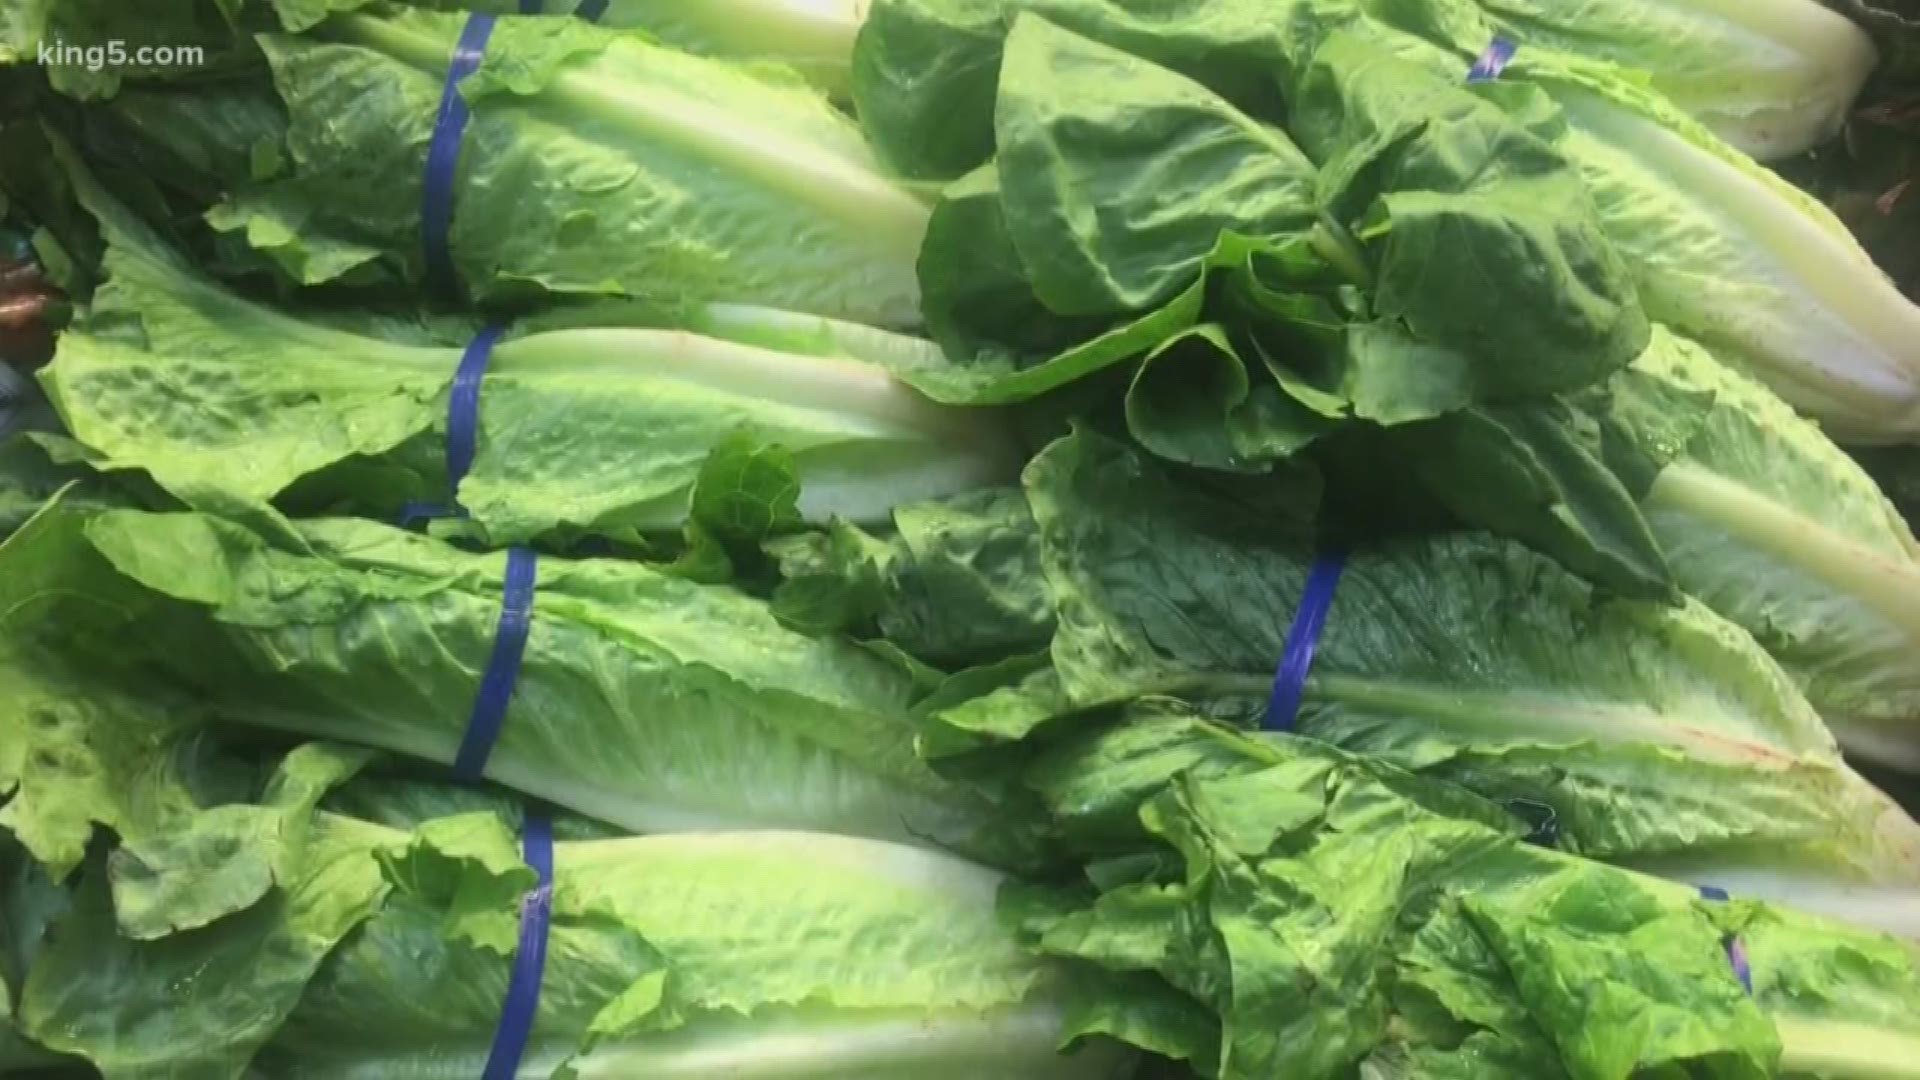 One out of every three families in the U-S serves some kind of salad on Thanksgiving, but this year there's a serious warning about serving romaine lettuce.